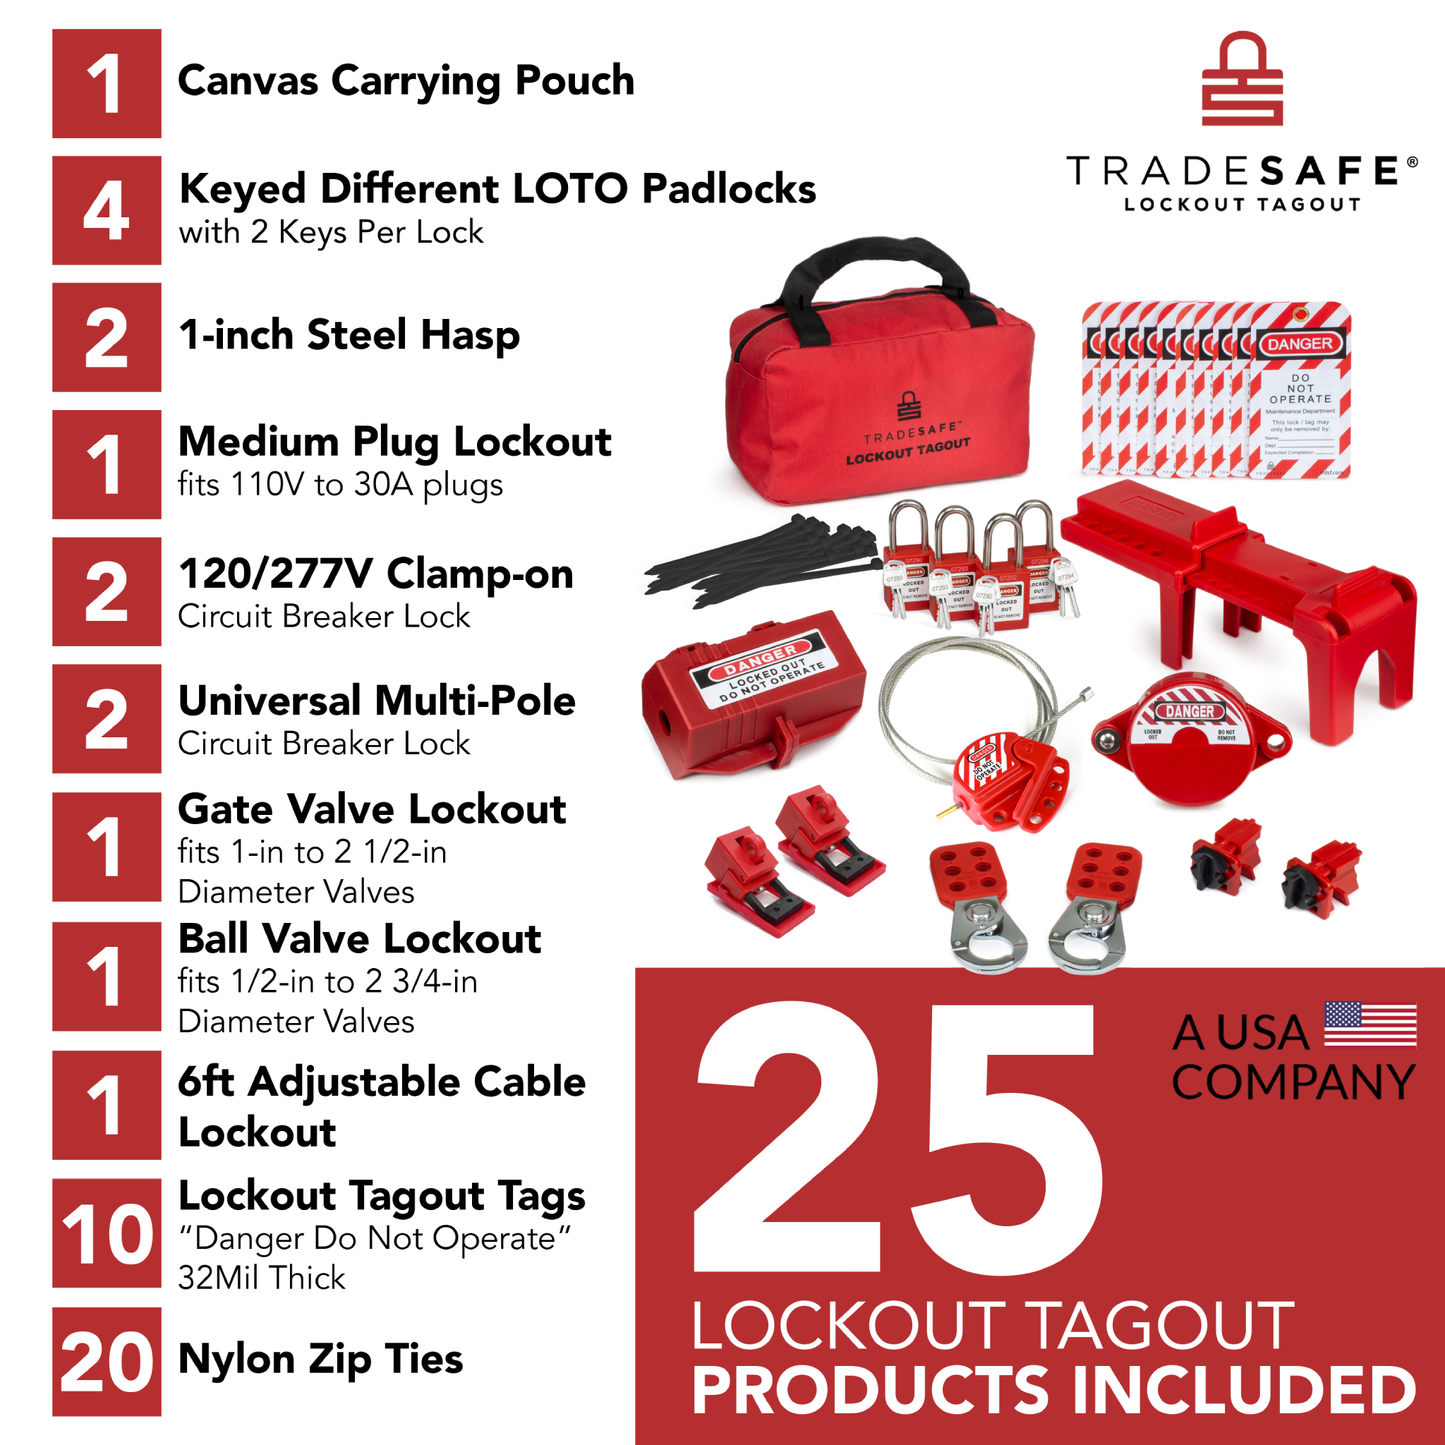 illustration of a Lockout Tagout kit with component quantities listed